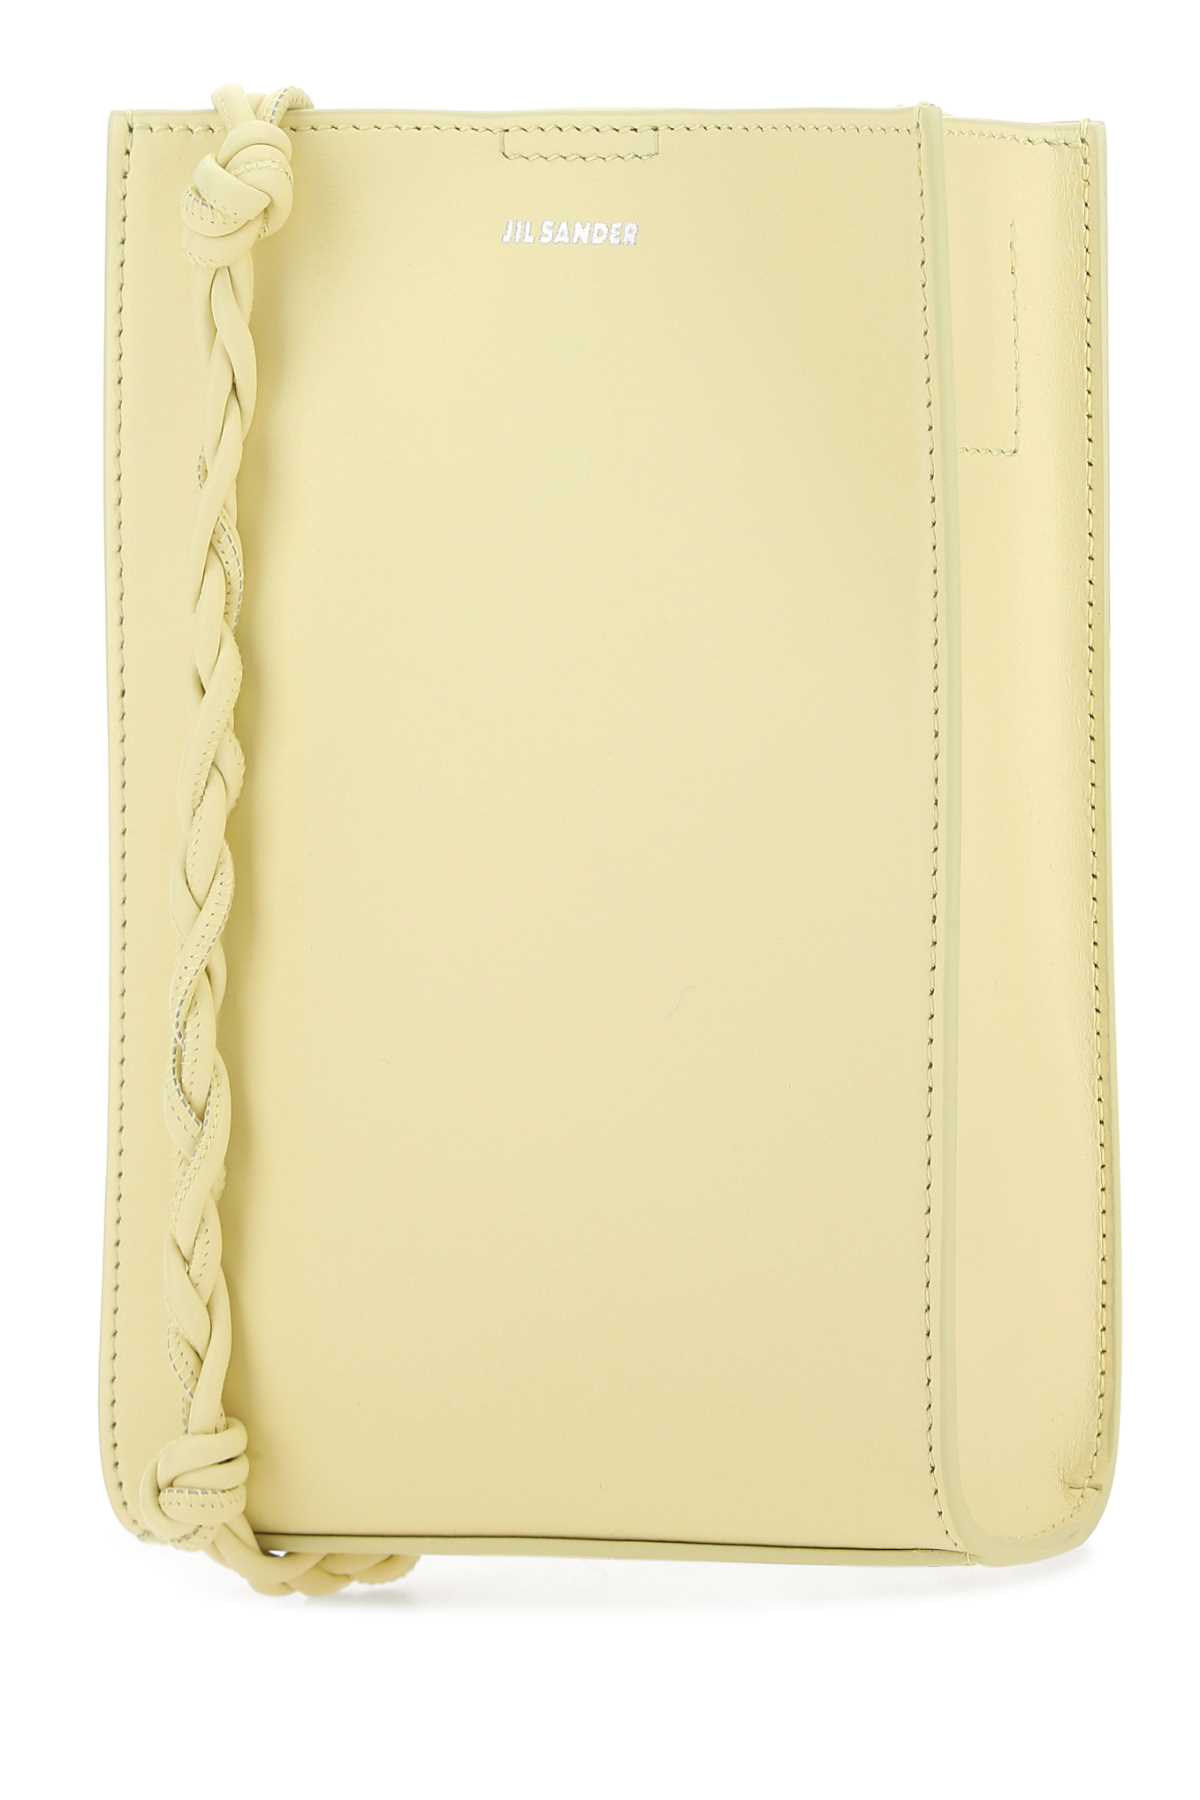 Jil Sander Pastel Yellow Leather Small Tangle Shoulder Bag In 742